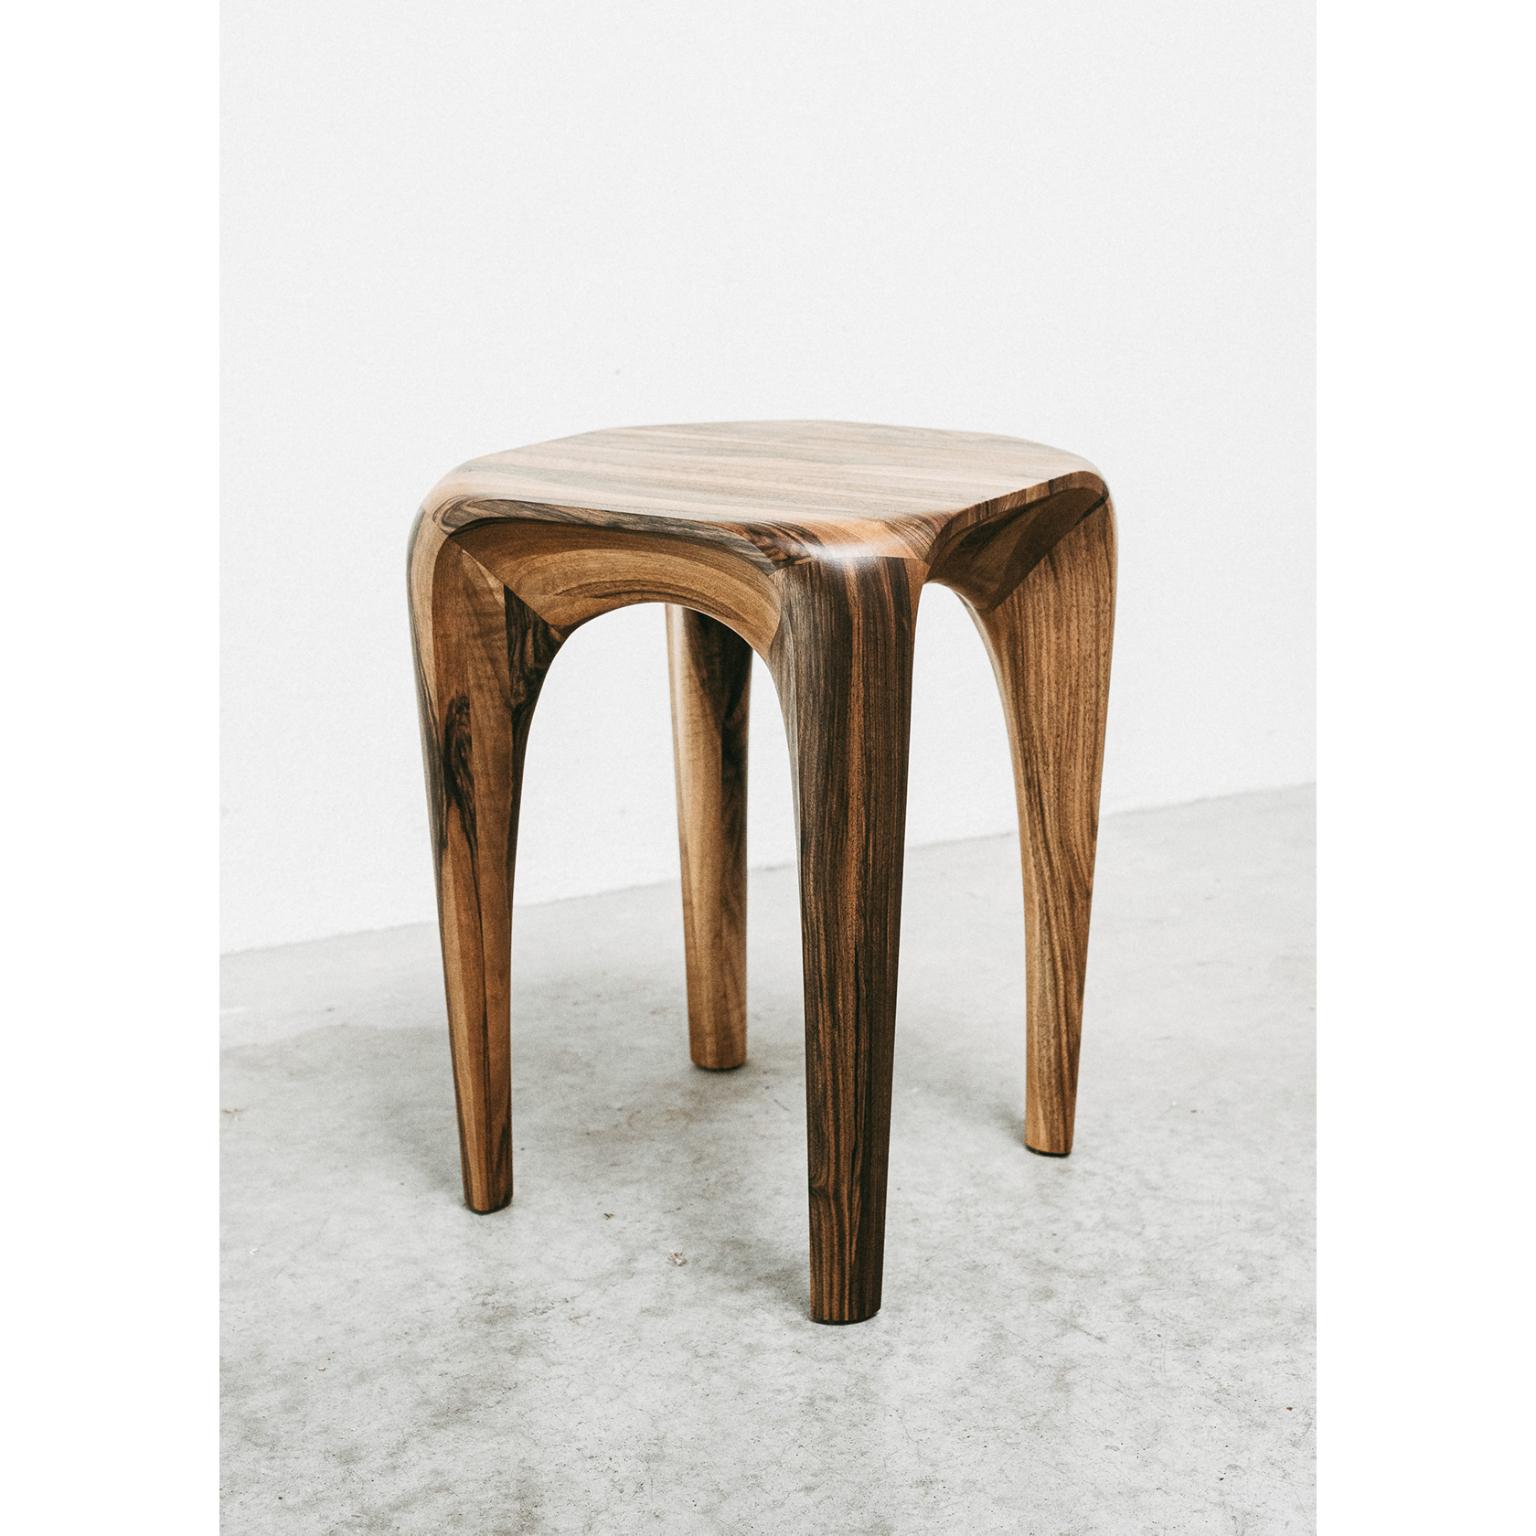 Handmade walnut tabouret by Maxime Goléo.
Unique piece.
Dimensions: W 38 x D 38 x H 50 cm.
Materials: French walnut.

Each piece is unique, handmade, signed and dated.
Other dimensions and types of wood on request.

Designer, cabinetmaker